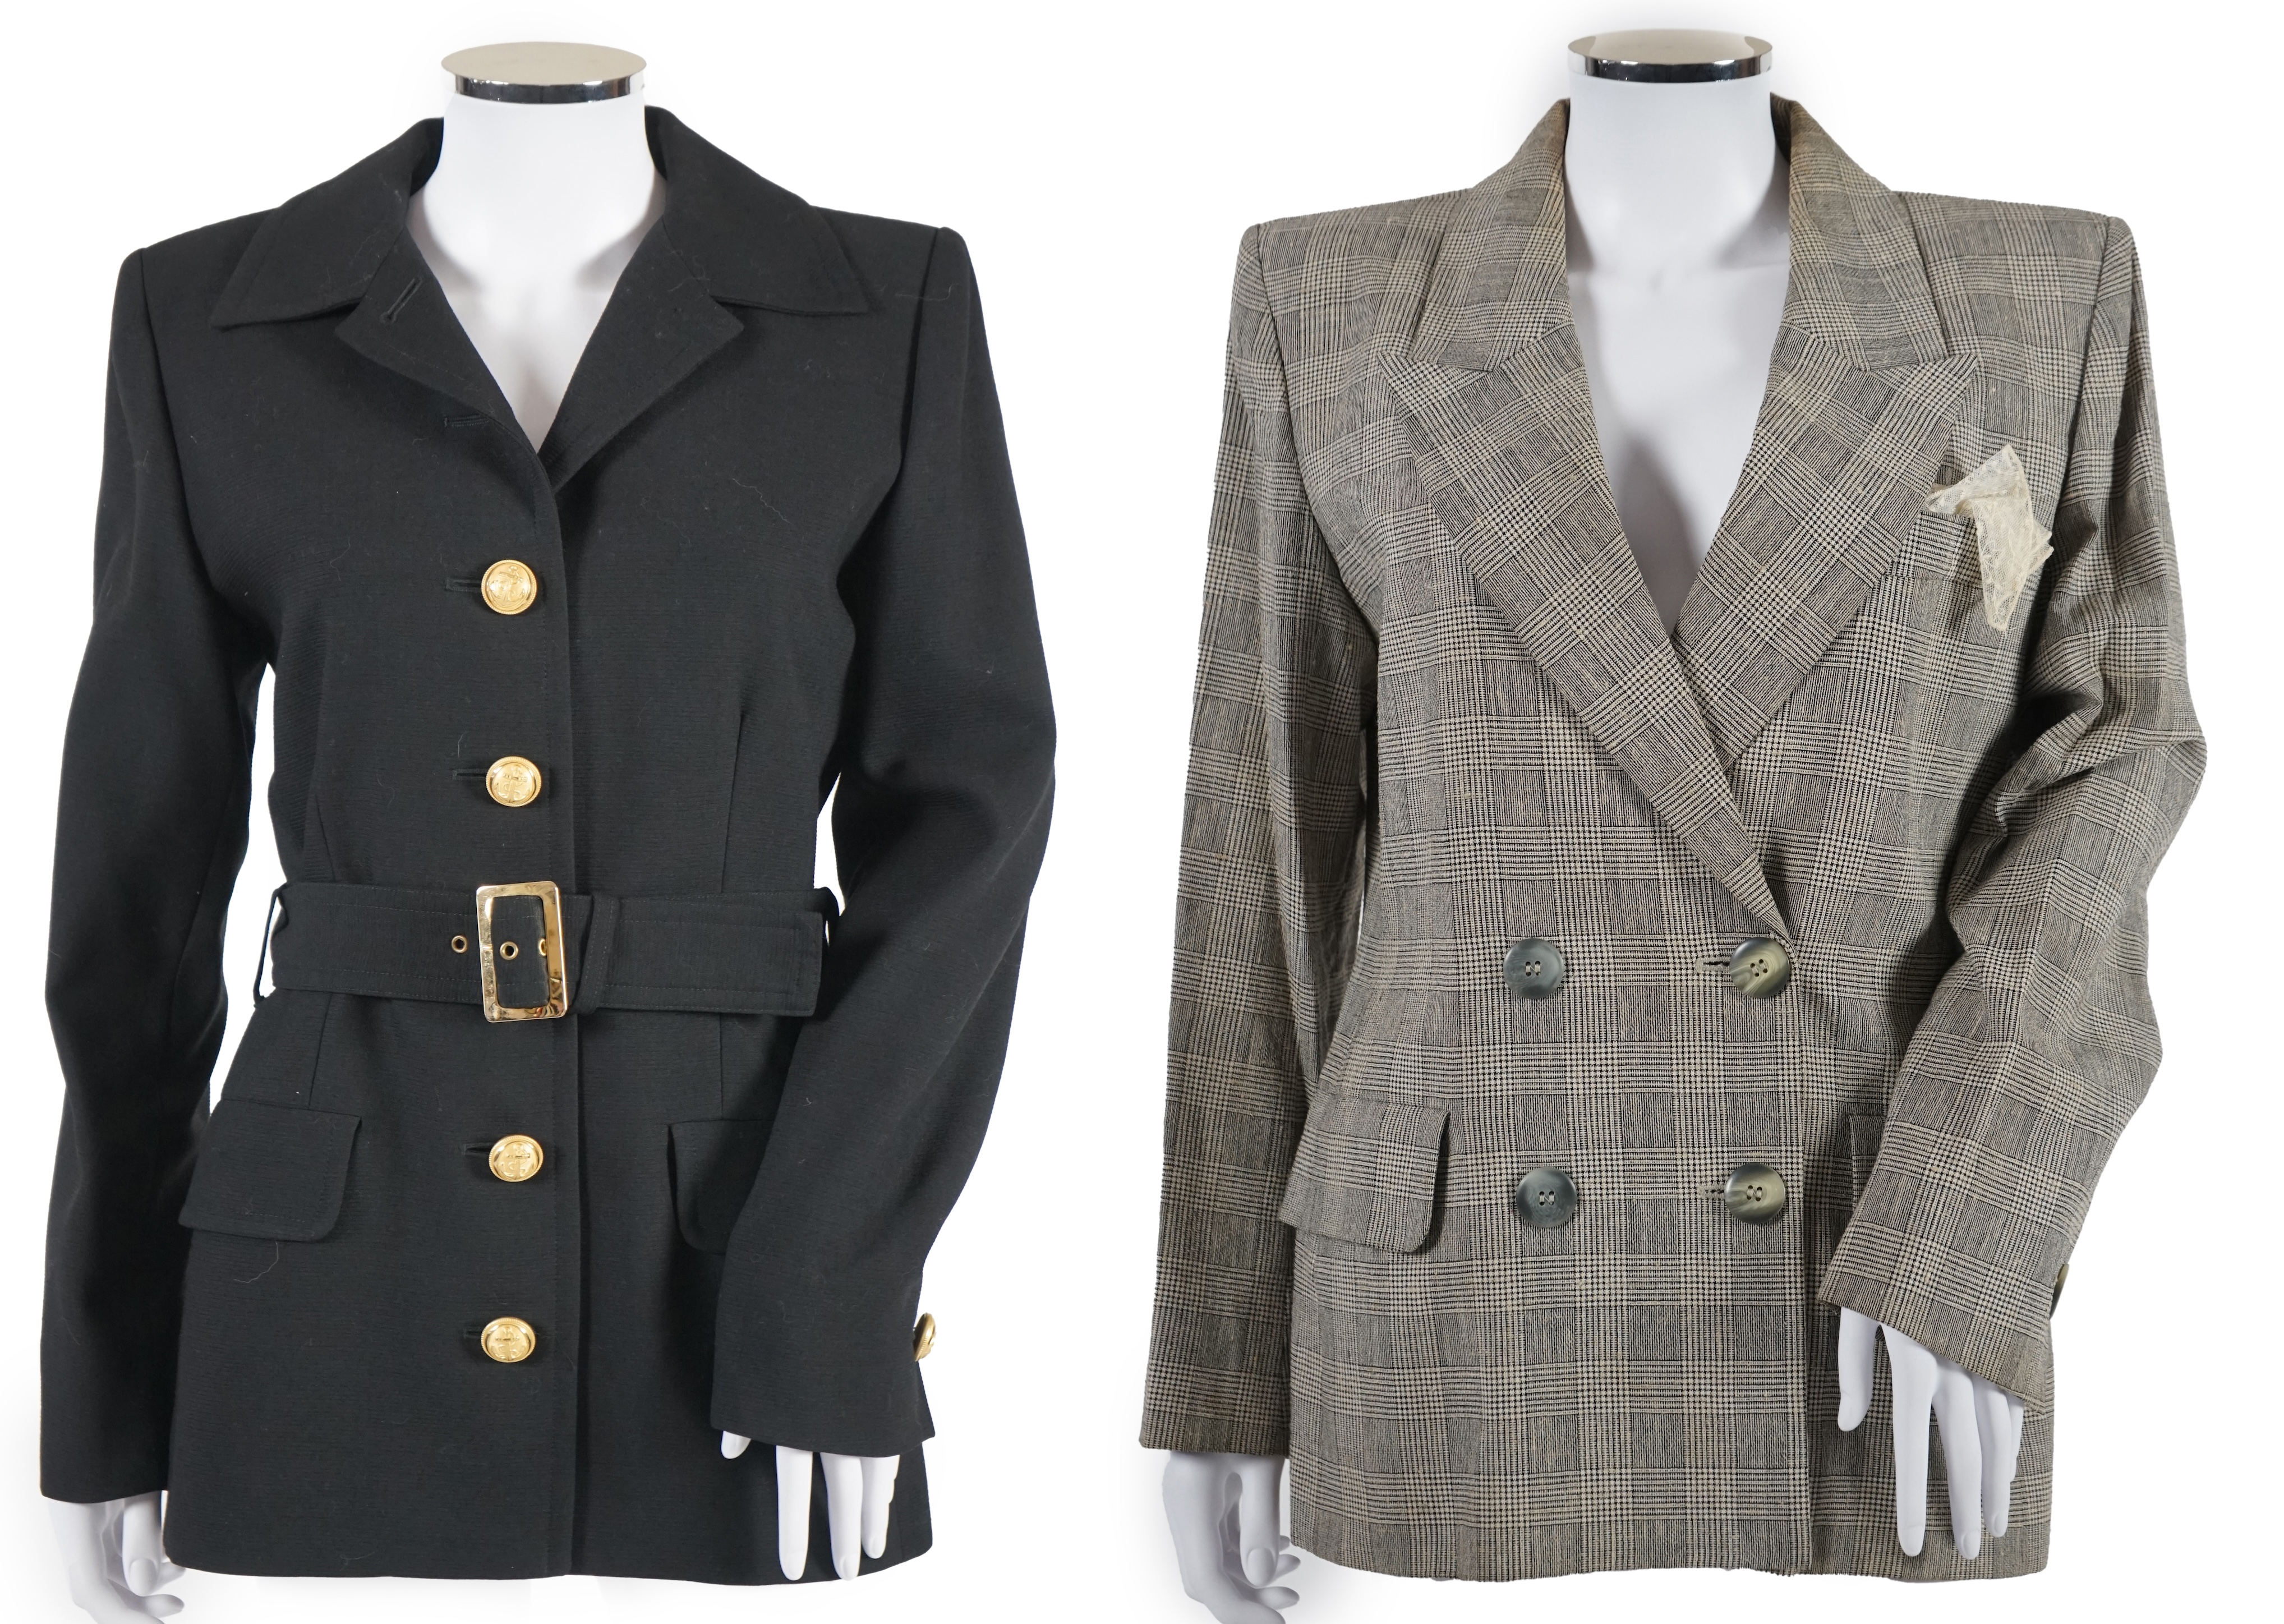 Two vintage Yves Saint Laurent variation lady's trouser suits, F 40 (UK 12). Please note alterations to make the waist smaller may have been carried out on some of the skirts. Proceeds to Happy Paws Puppy Rescue.